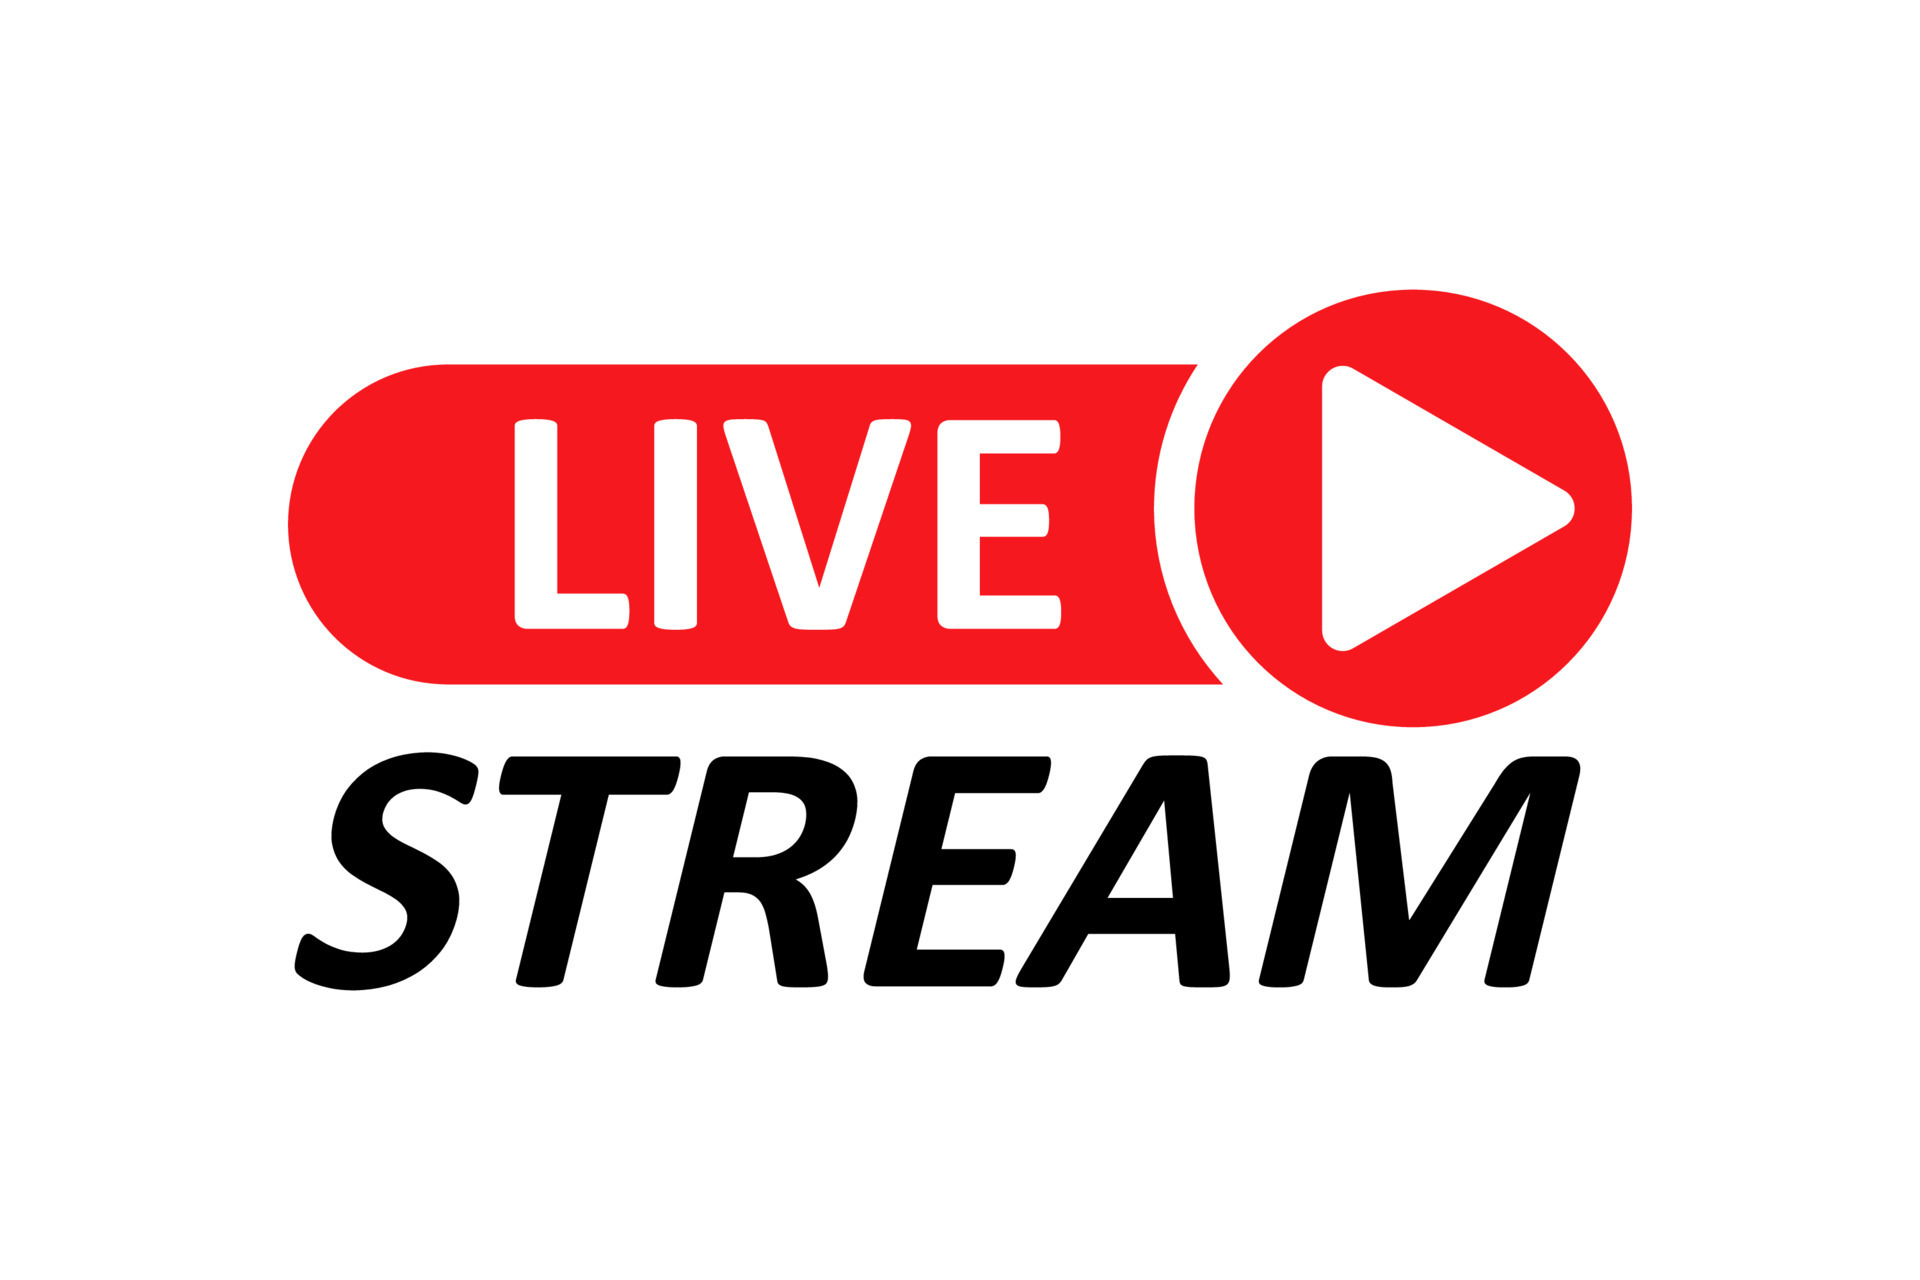 Live stream symbol, icon with play button. Emblem for broadcasting, online tv, sport, news and radio streaming. Template for shows, movies and live performances